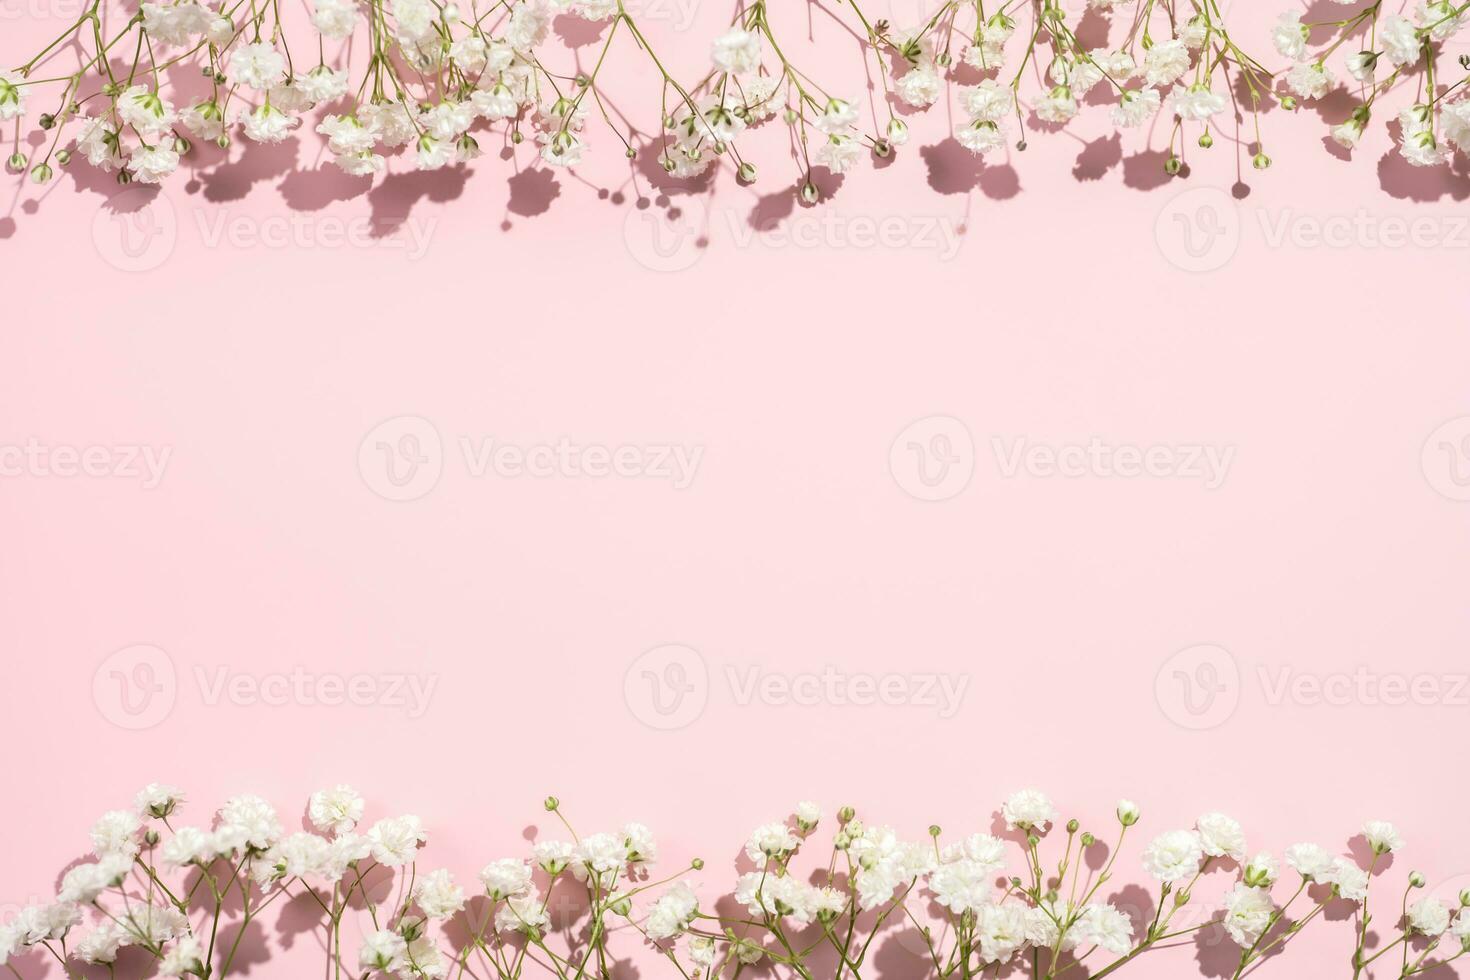 Baby's breath gypsophila on pink background with shadow photo